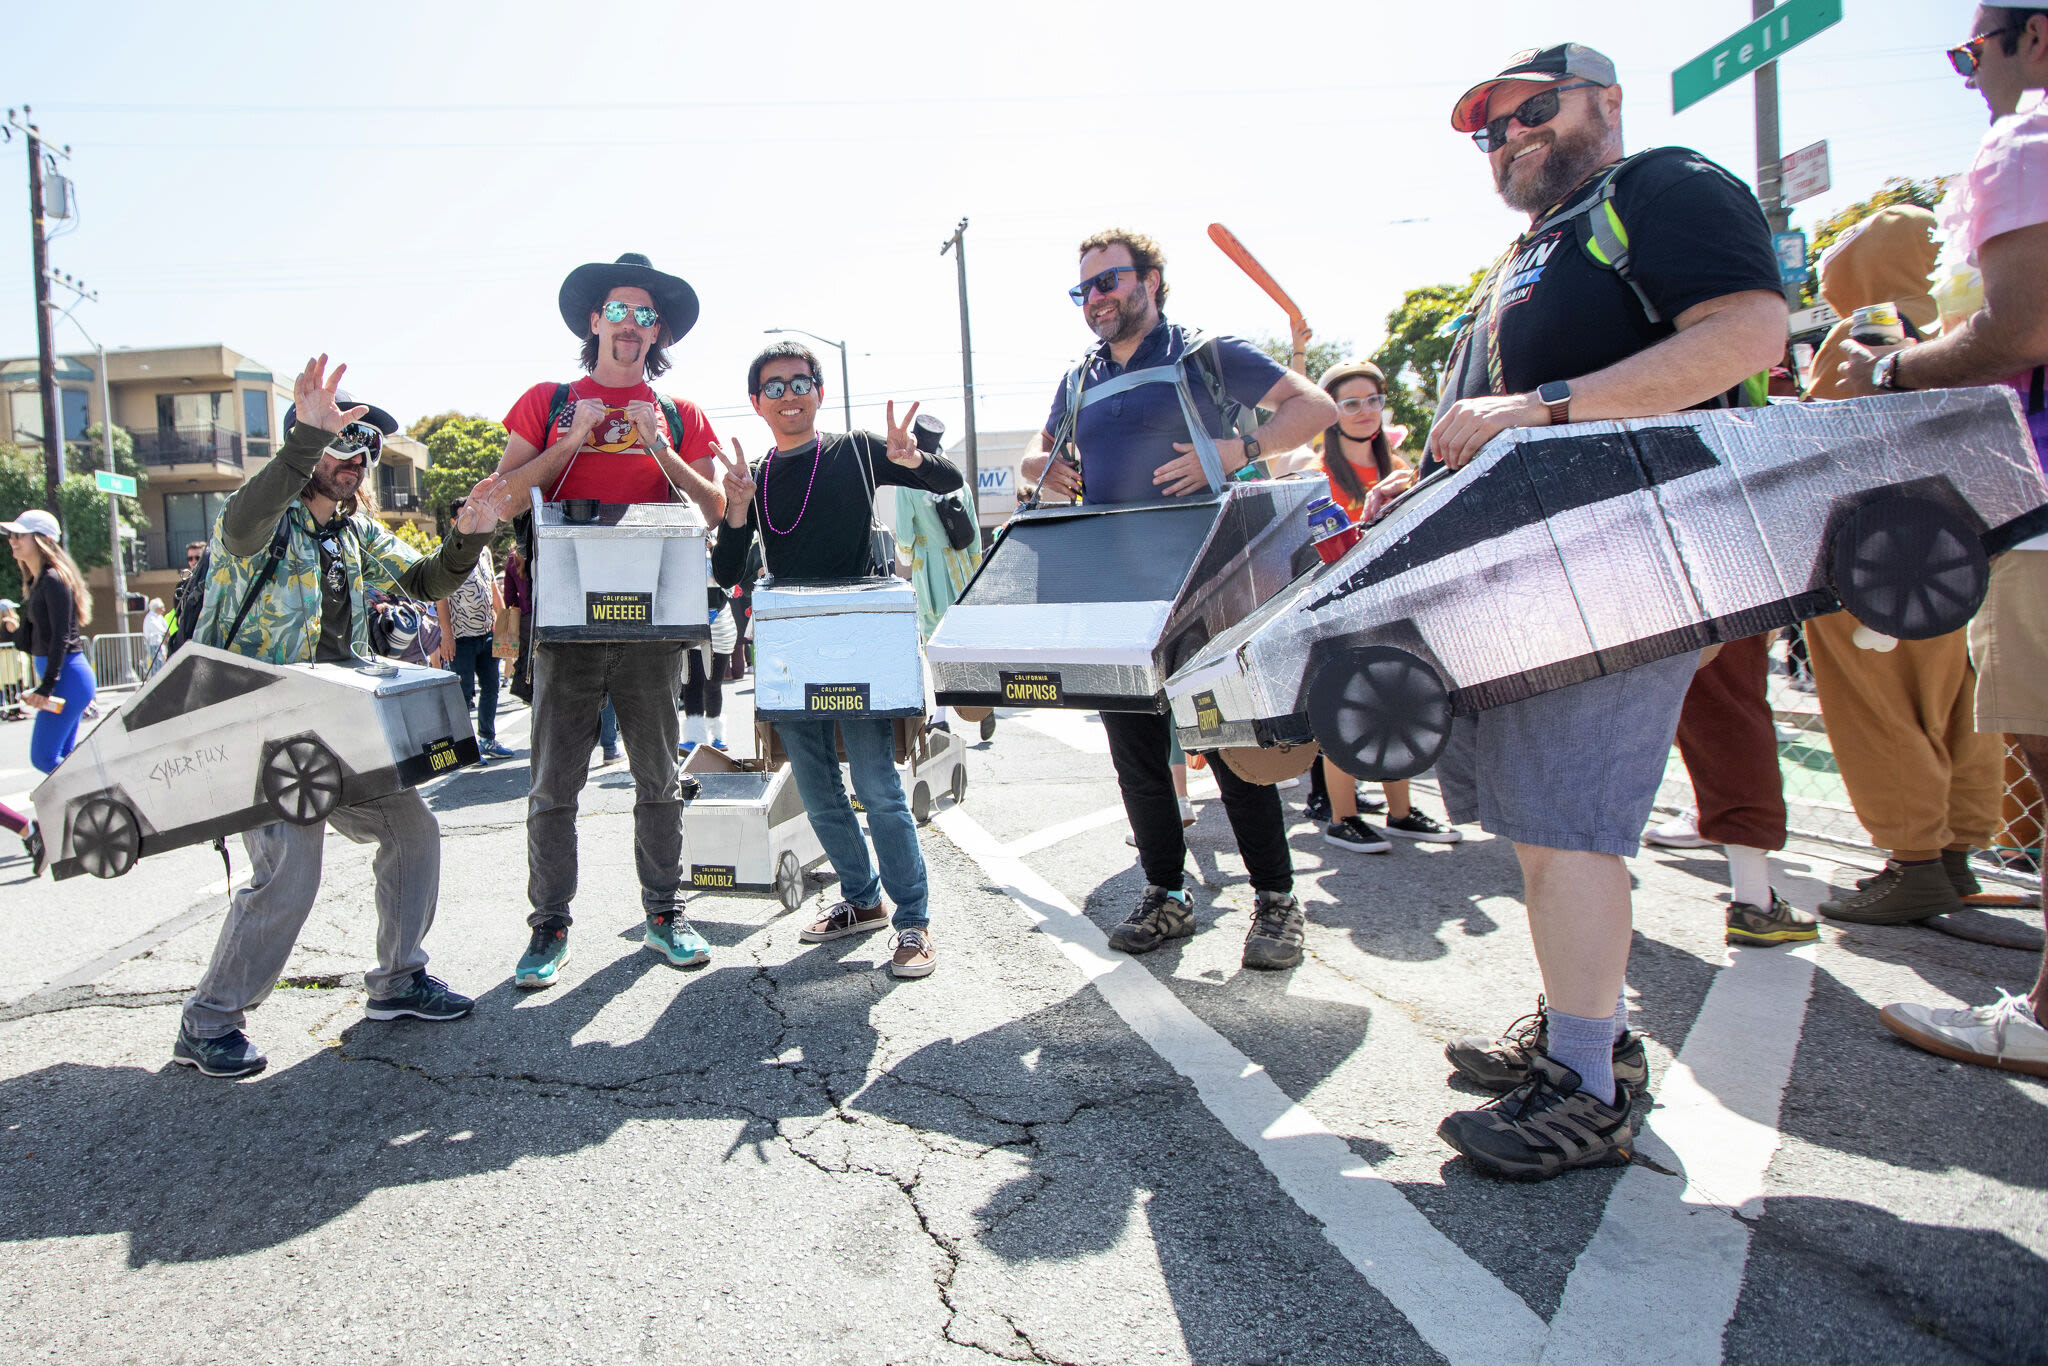 Cybertruck costumes spotted at Bay to Breakers race in SF